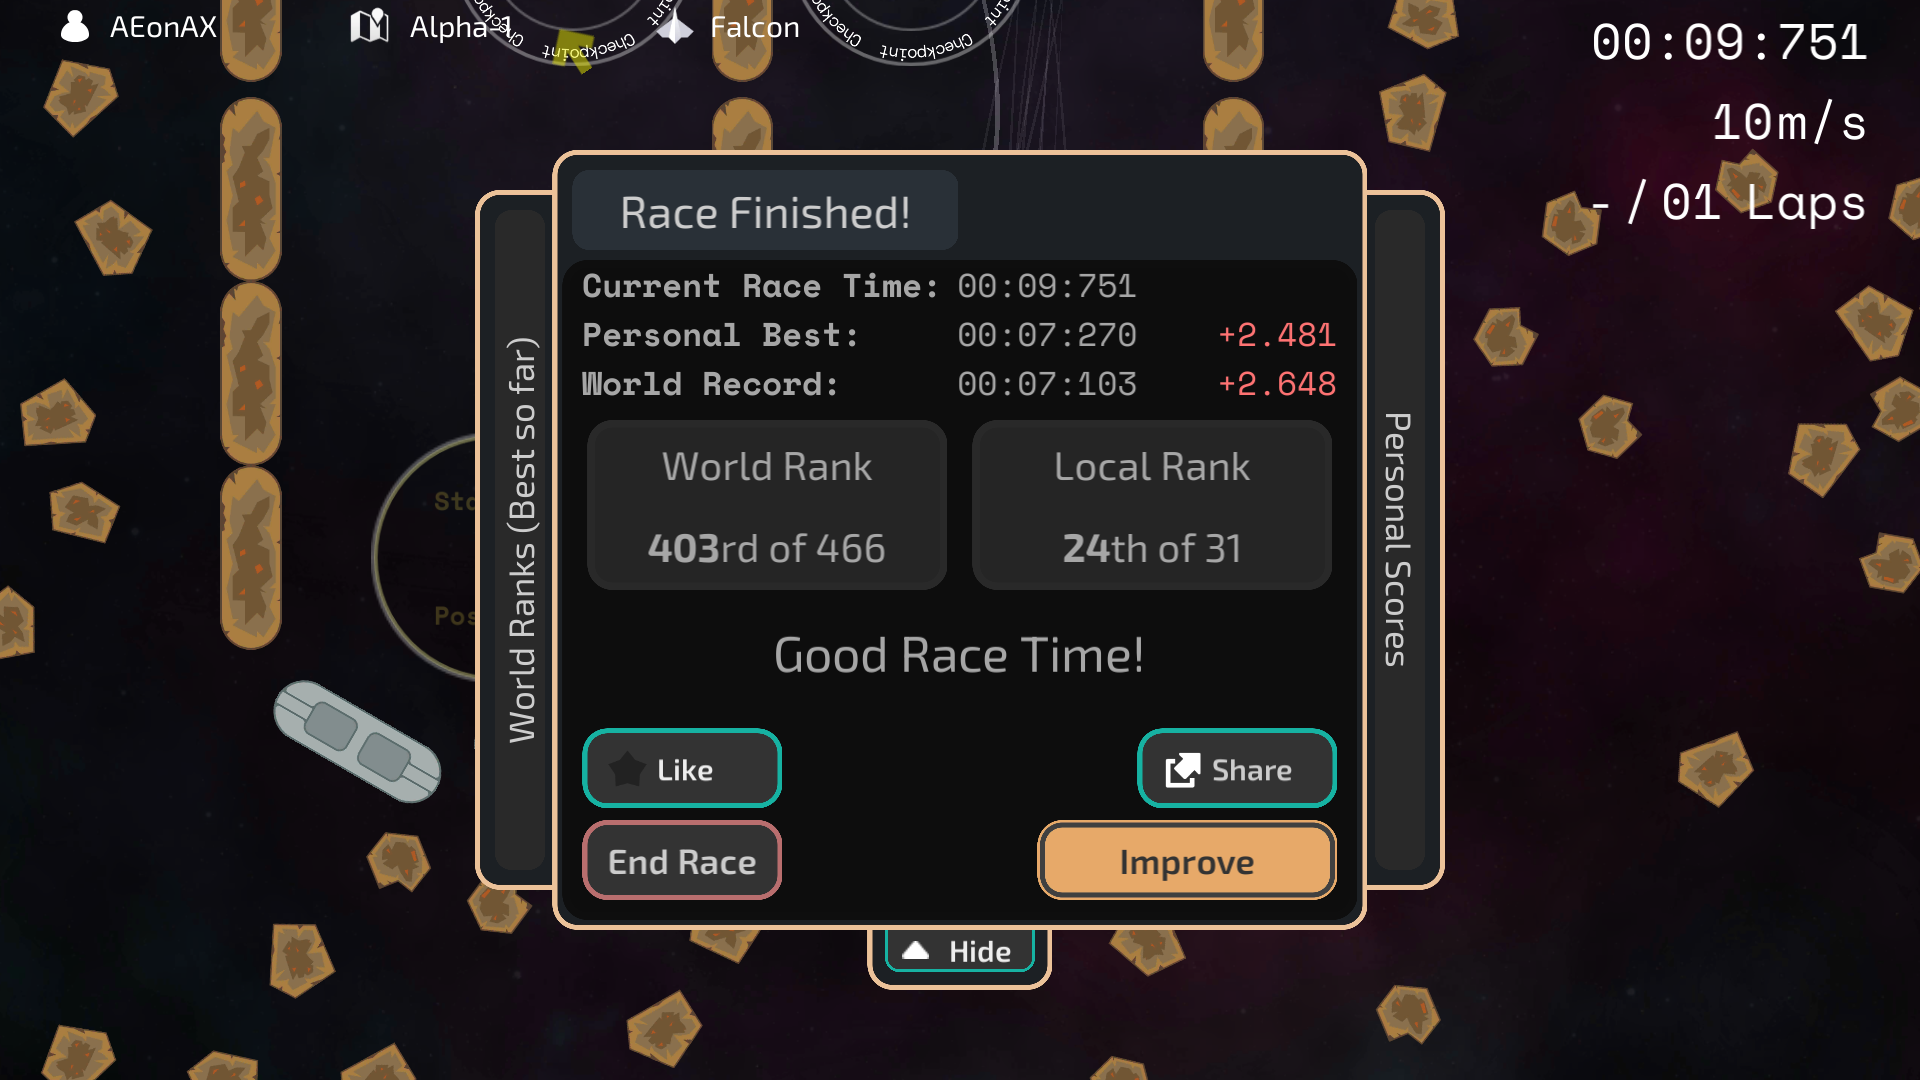 Post-Race Leaderboards, Improved Button Texts